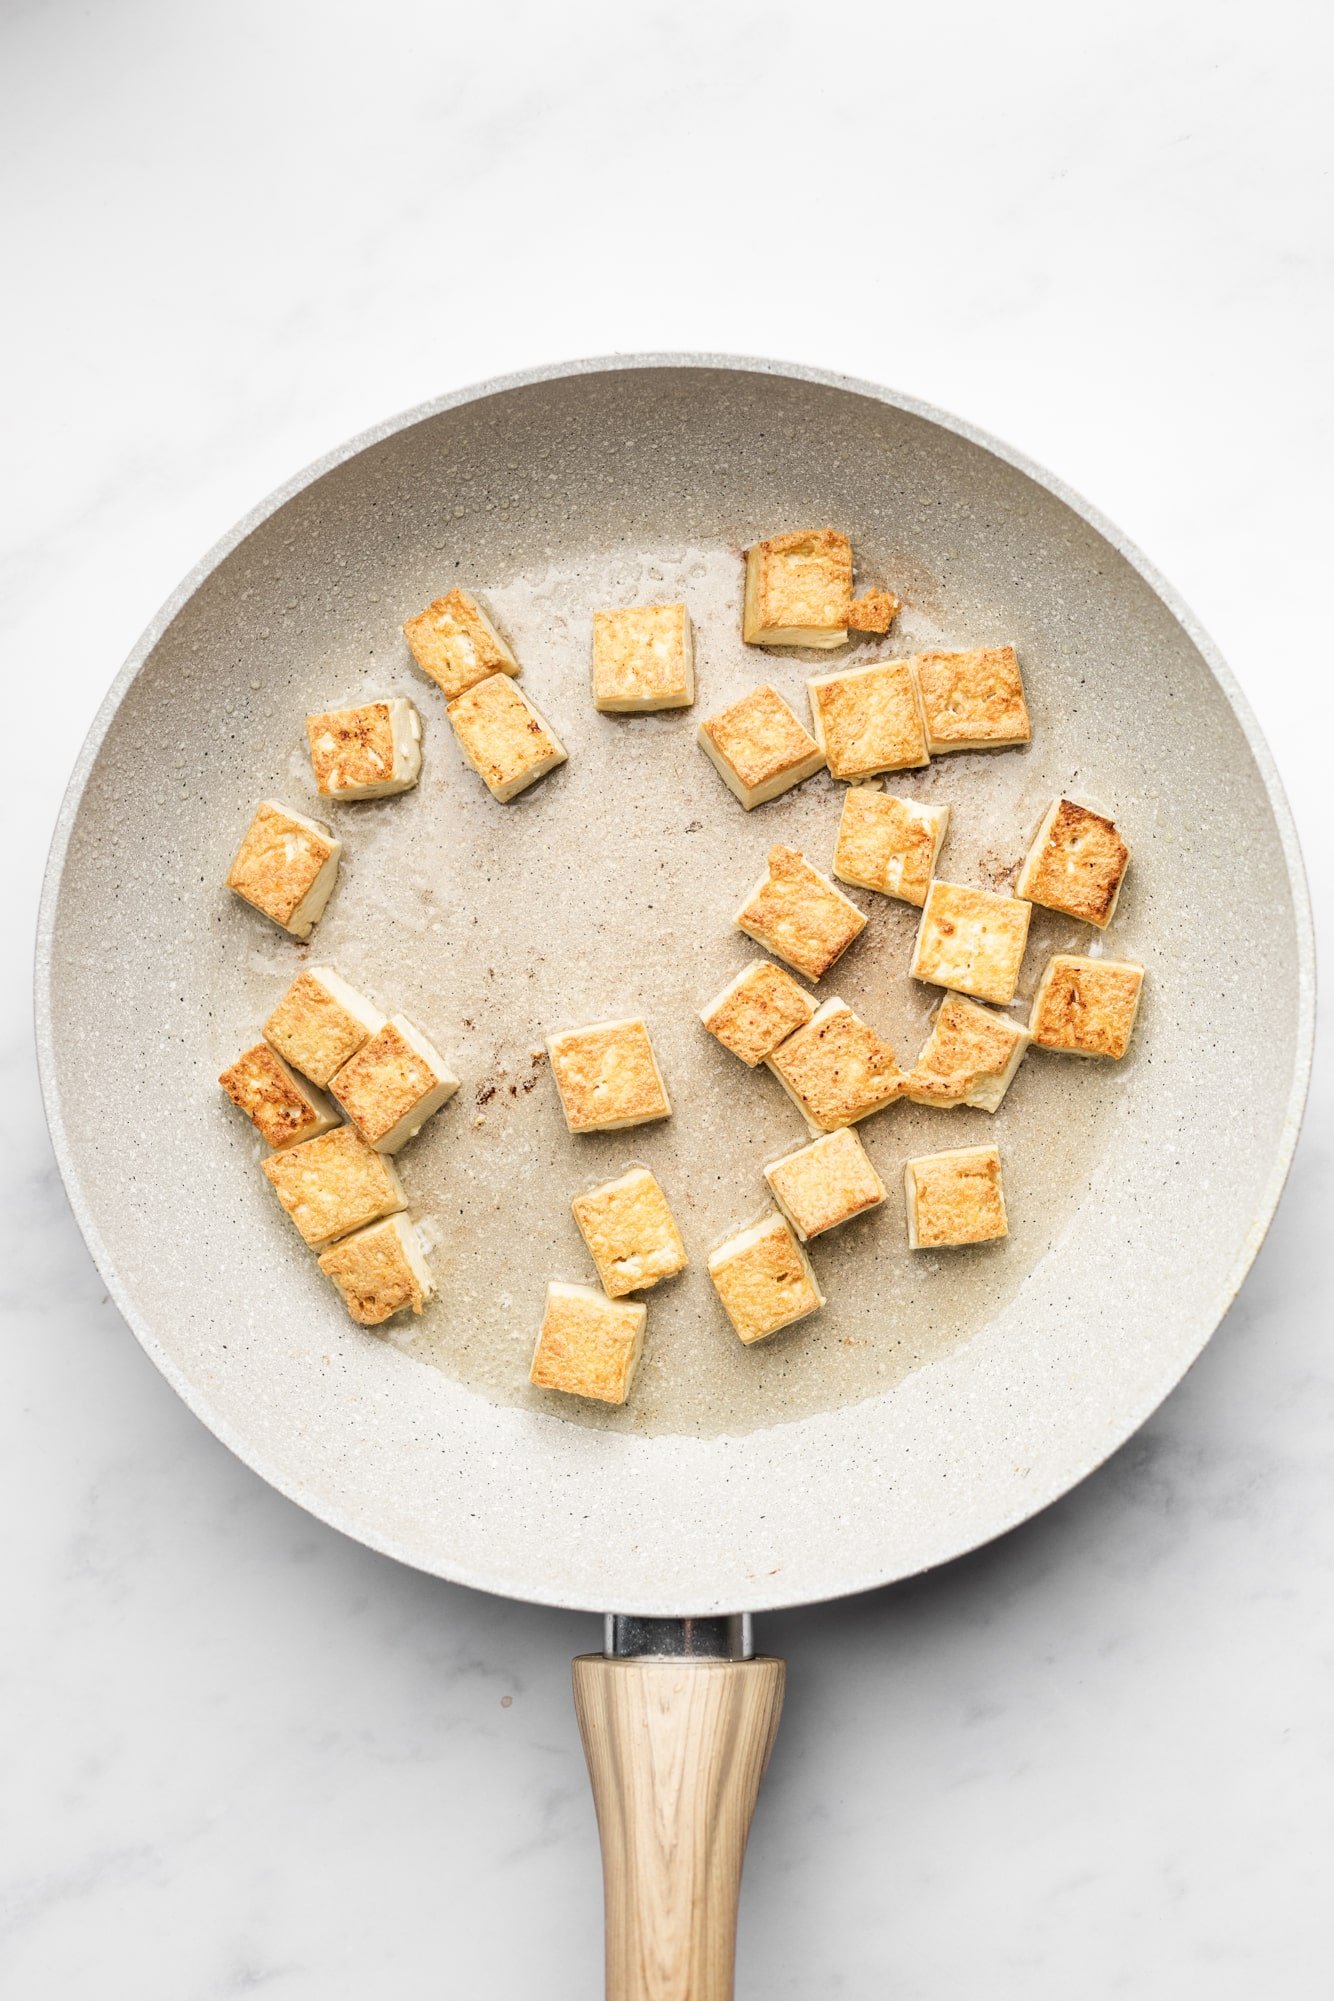 frying cubed tofu pieces in a beige pan.